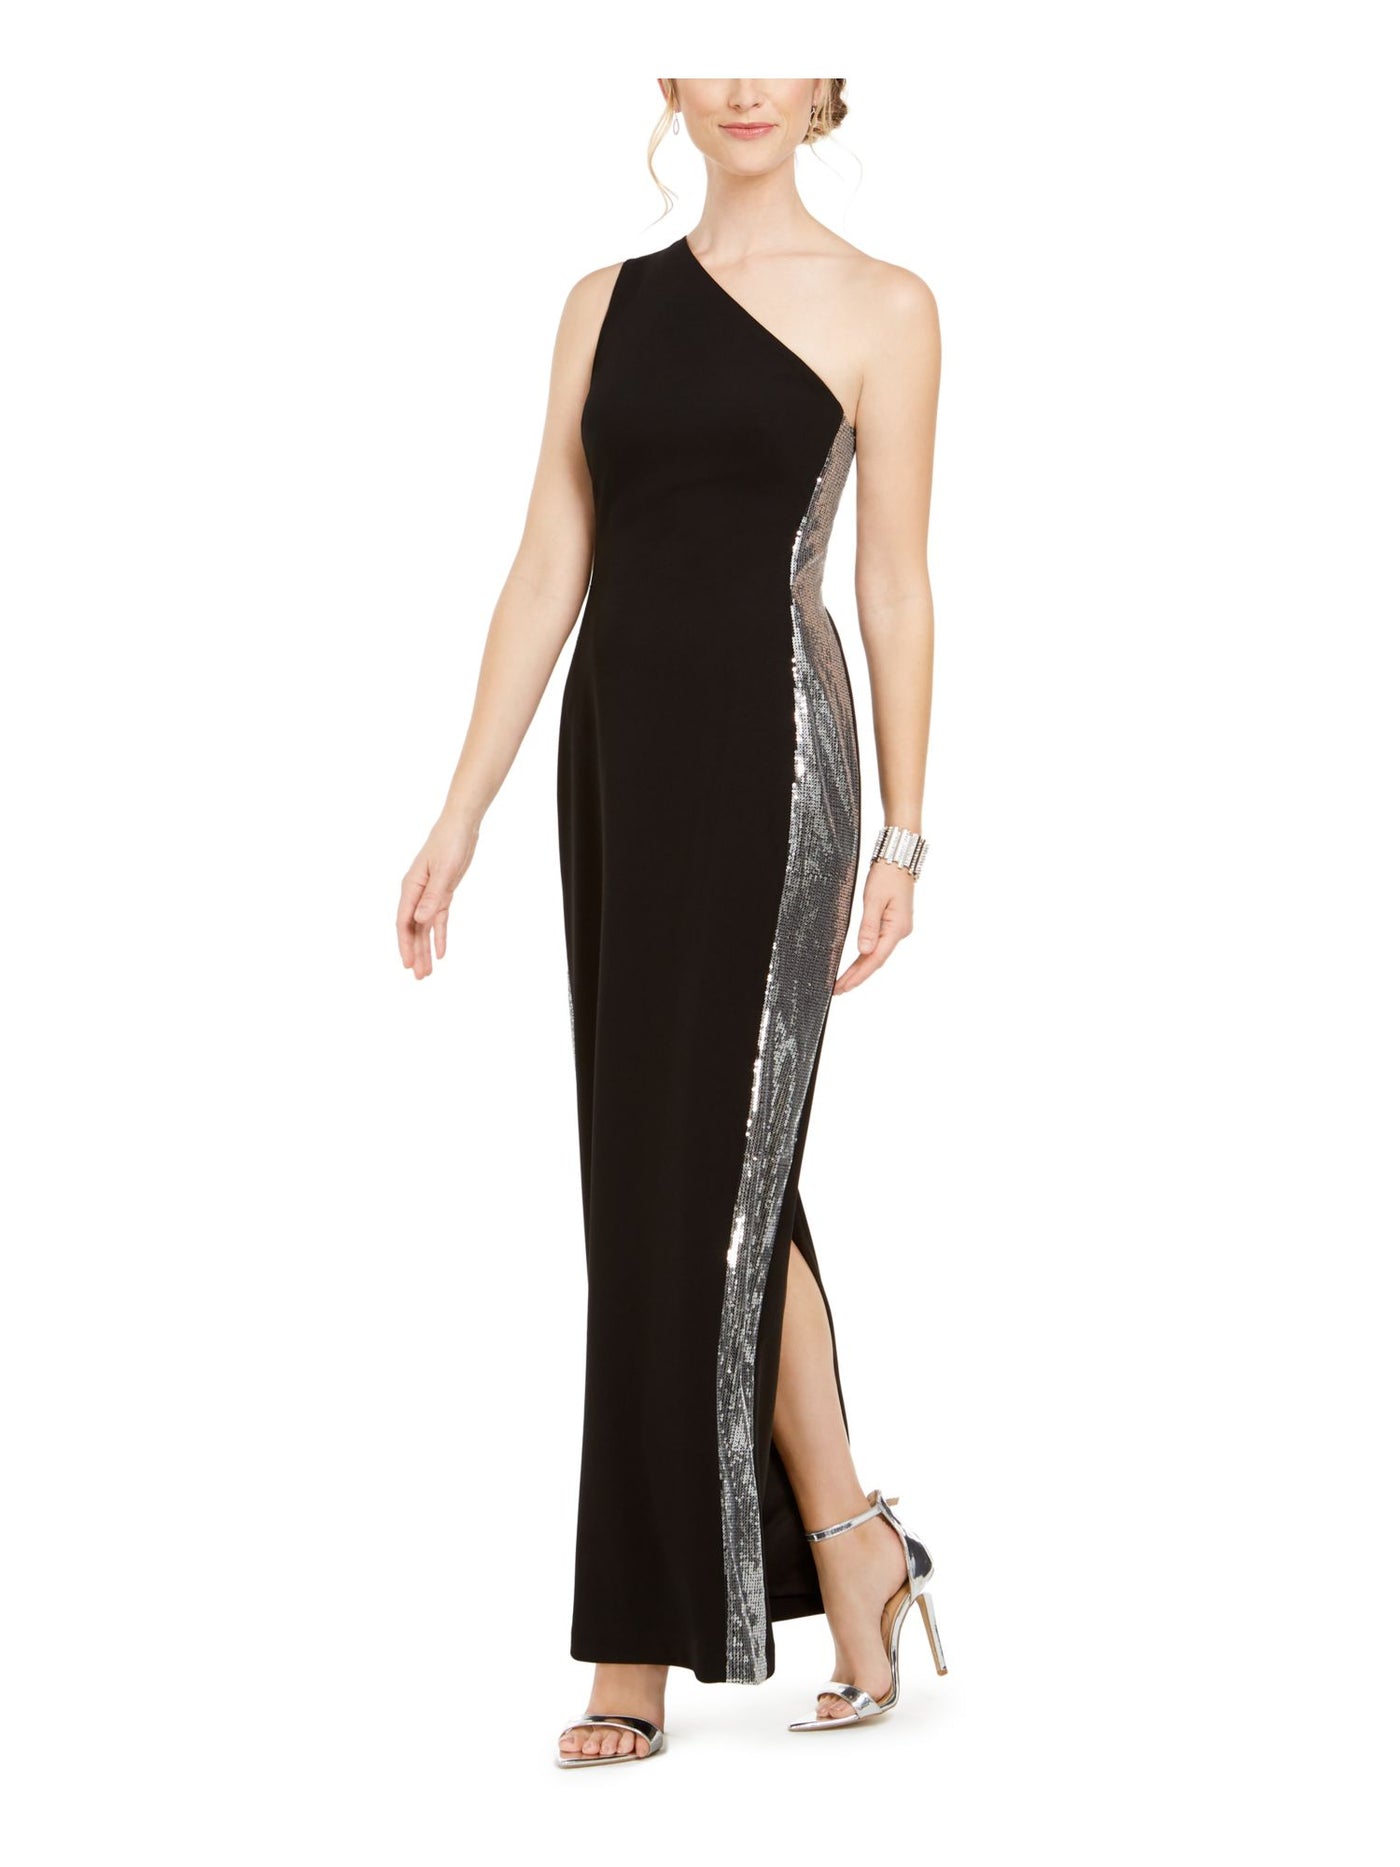 VINCE CAMUTO Womens Black Sequined Slitted One-shoulder Sleeveless Asymmetrical Neckline Maxi Evening Dress Petites 2P